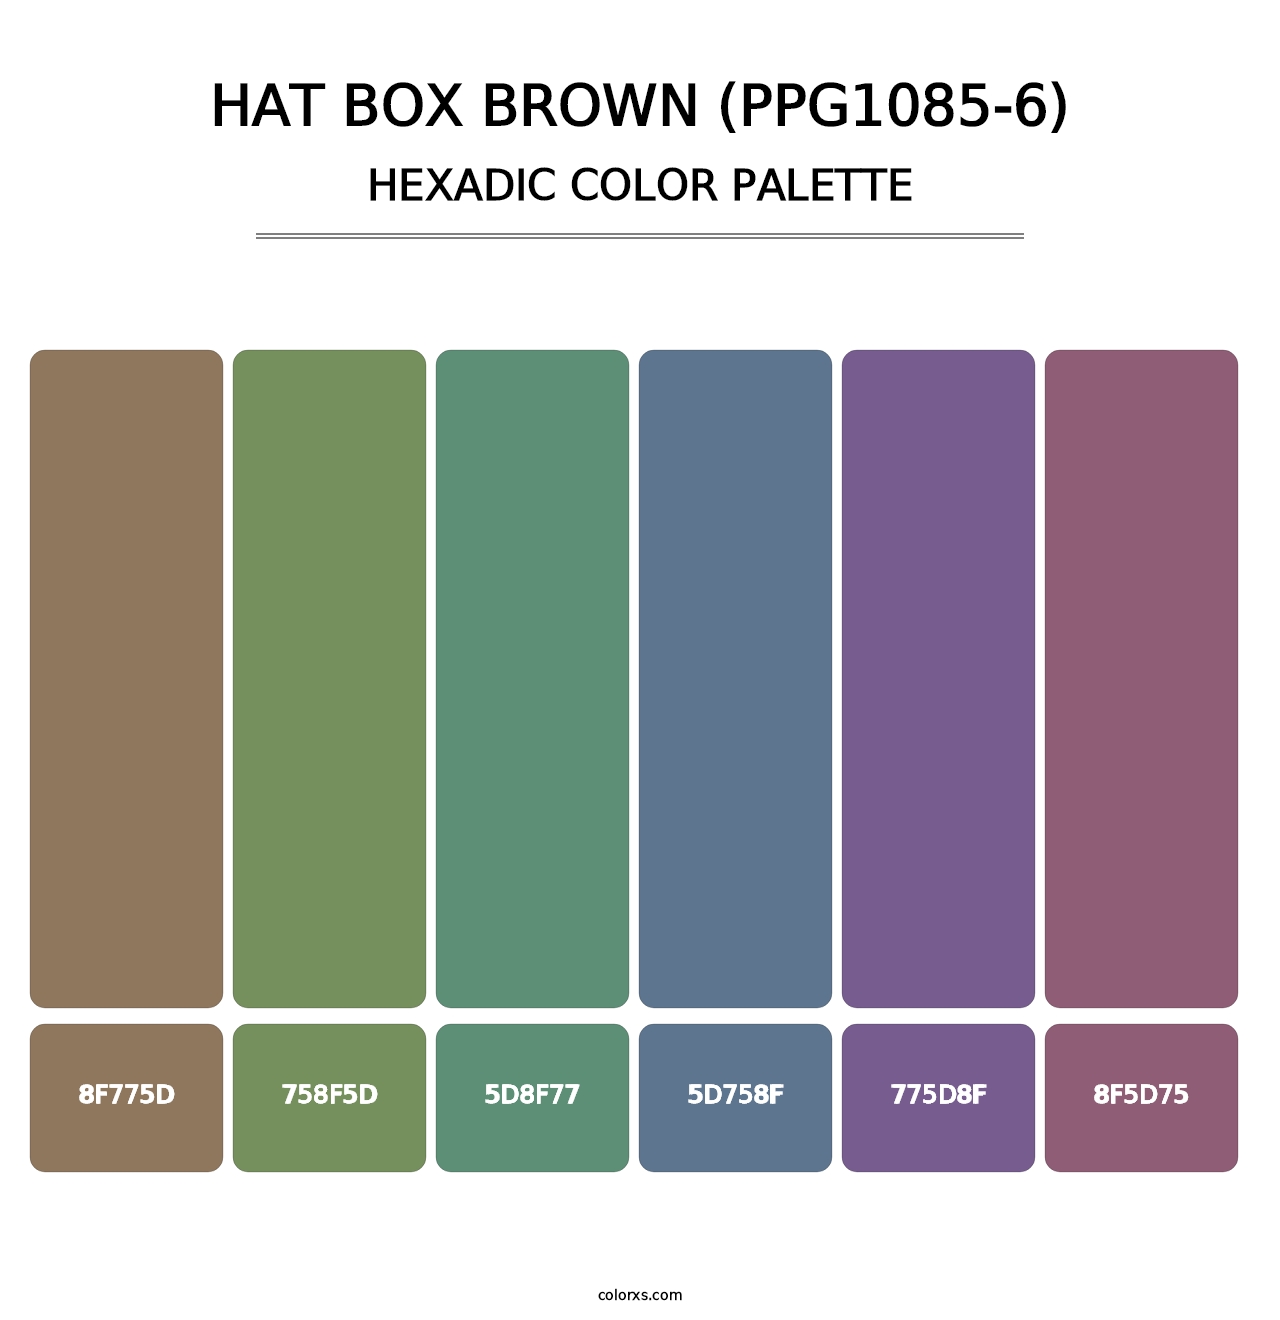 Hat Box Brown (PPG1085-6) - Hexadic Color Palette